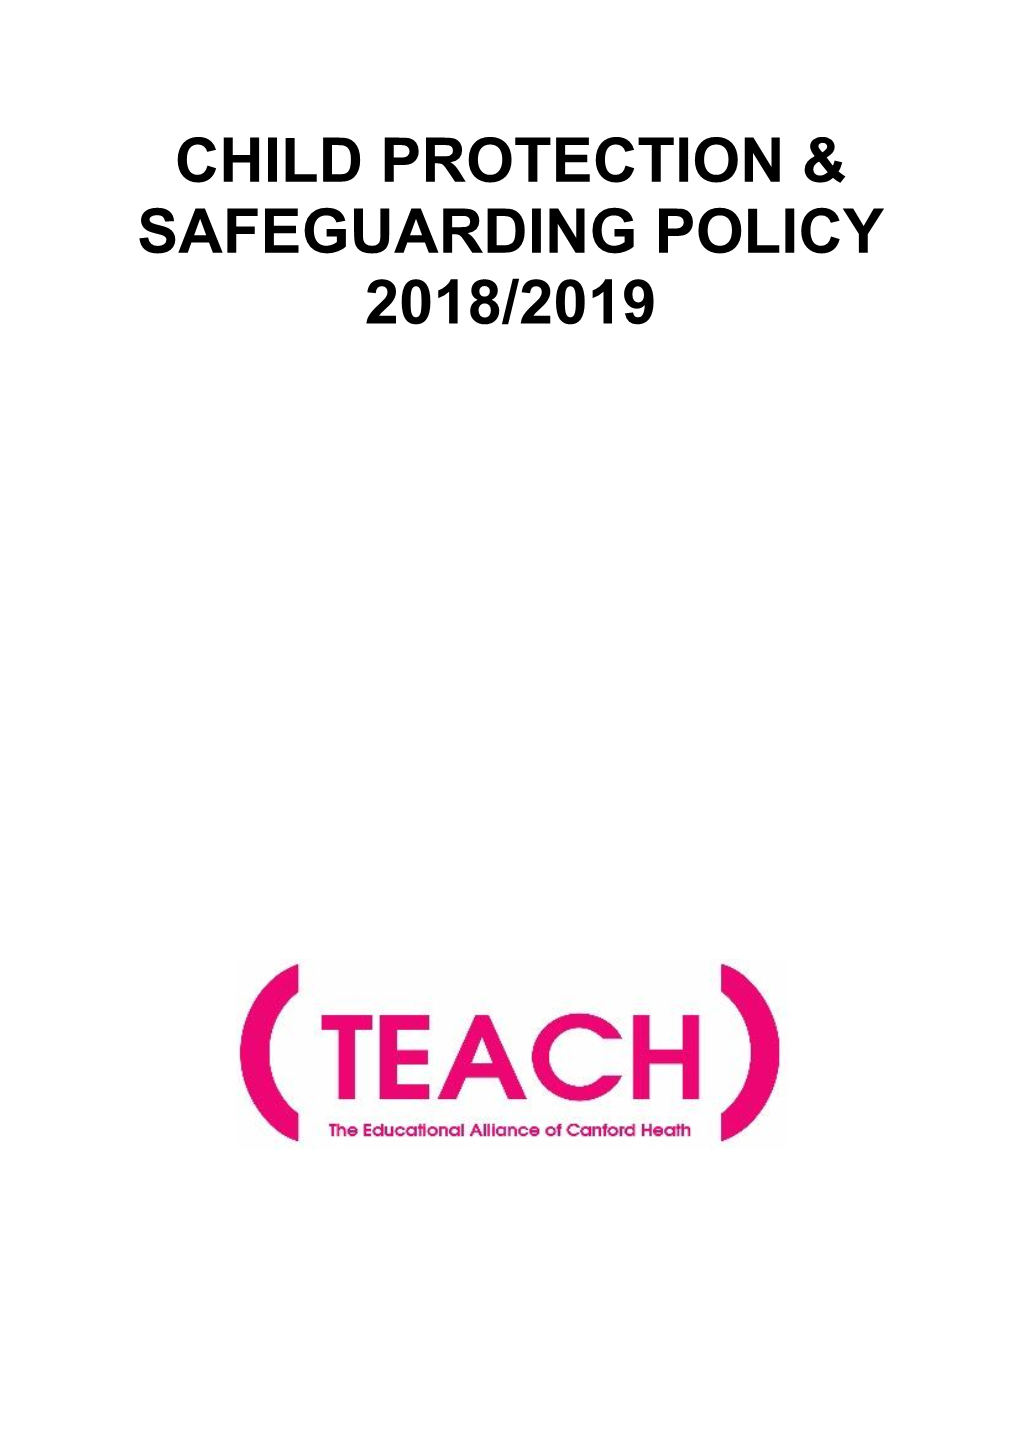 Child Protection & Safeguarding Policy 2018/2019